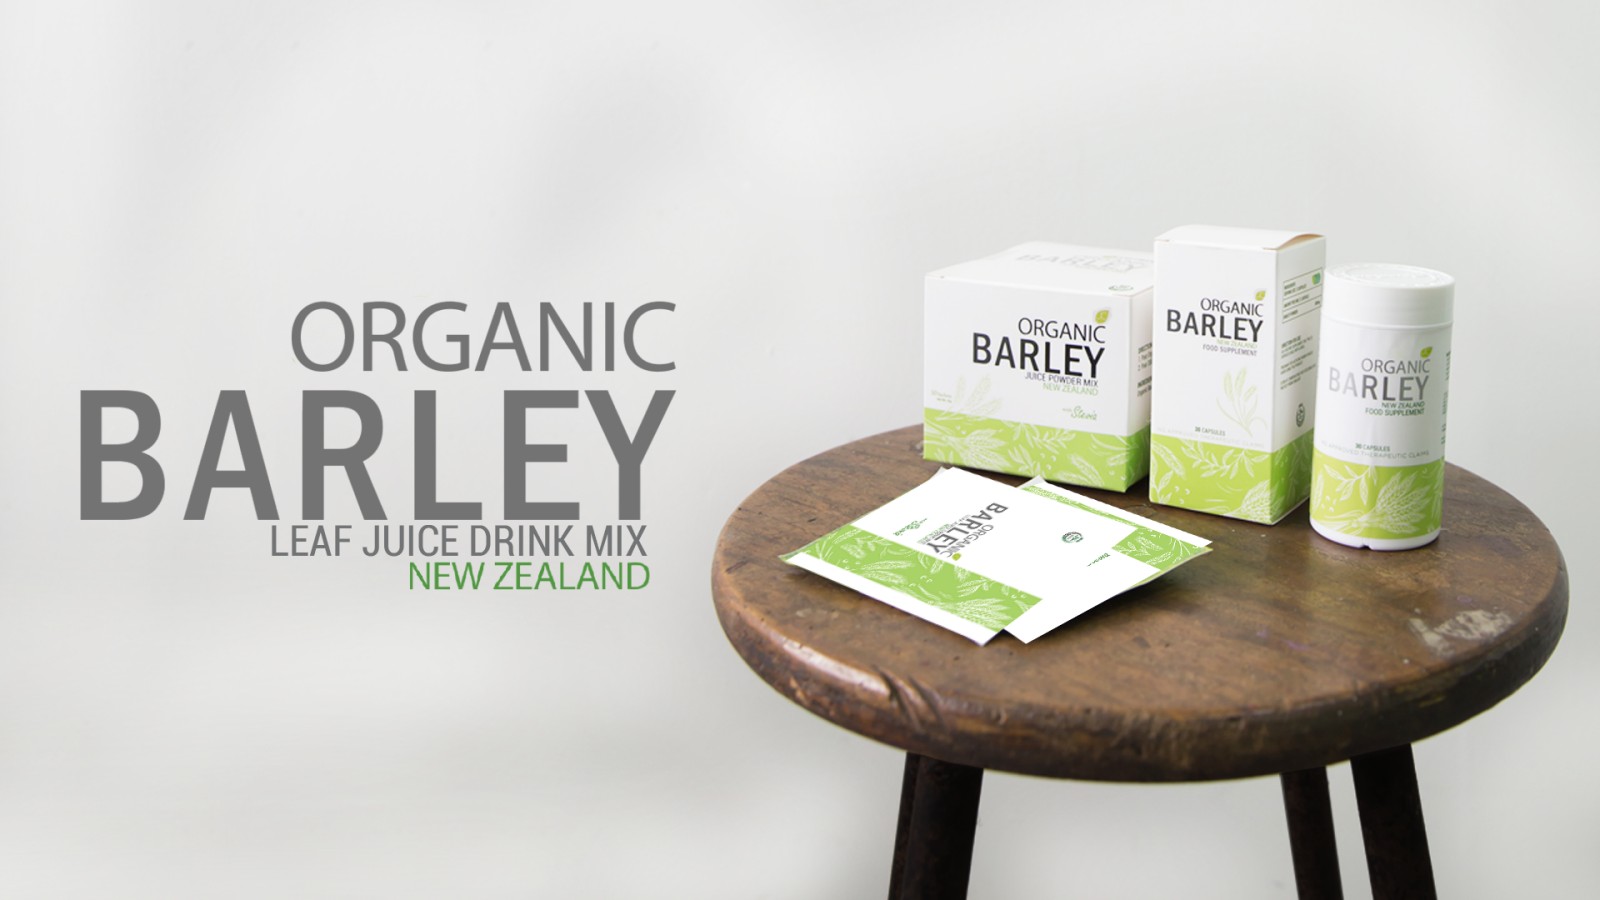 BARLEY helps maintain a healthy lifestyle